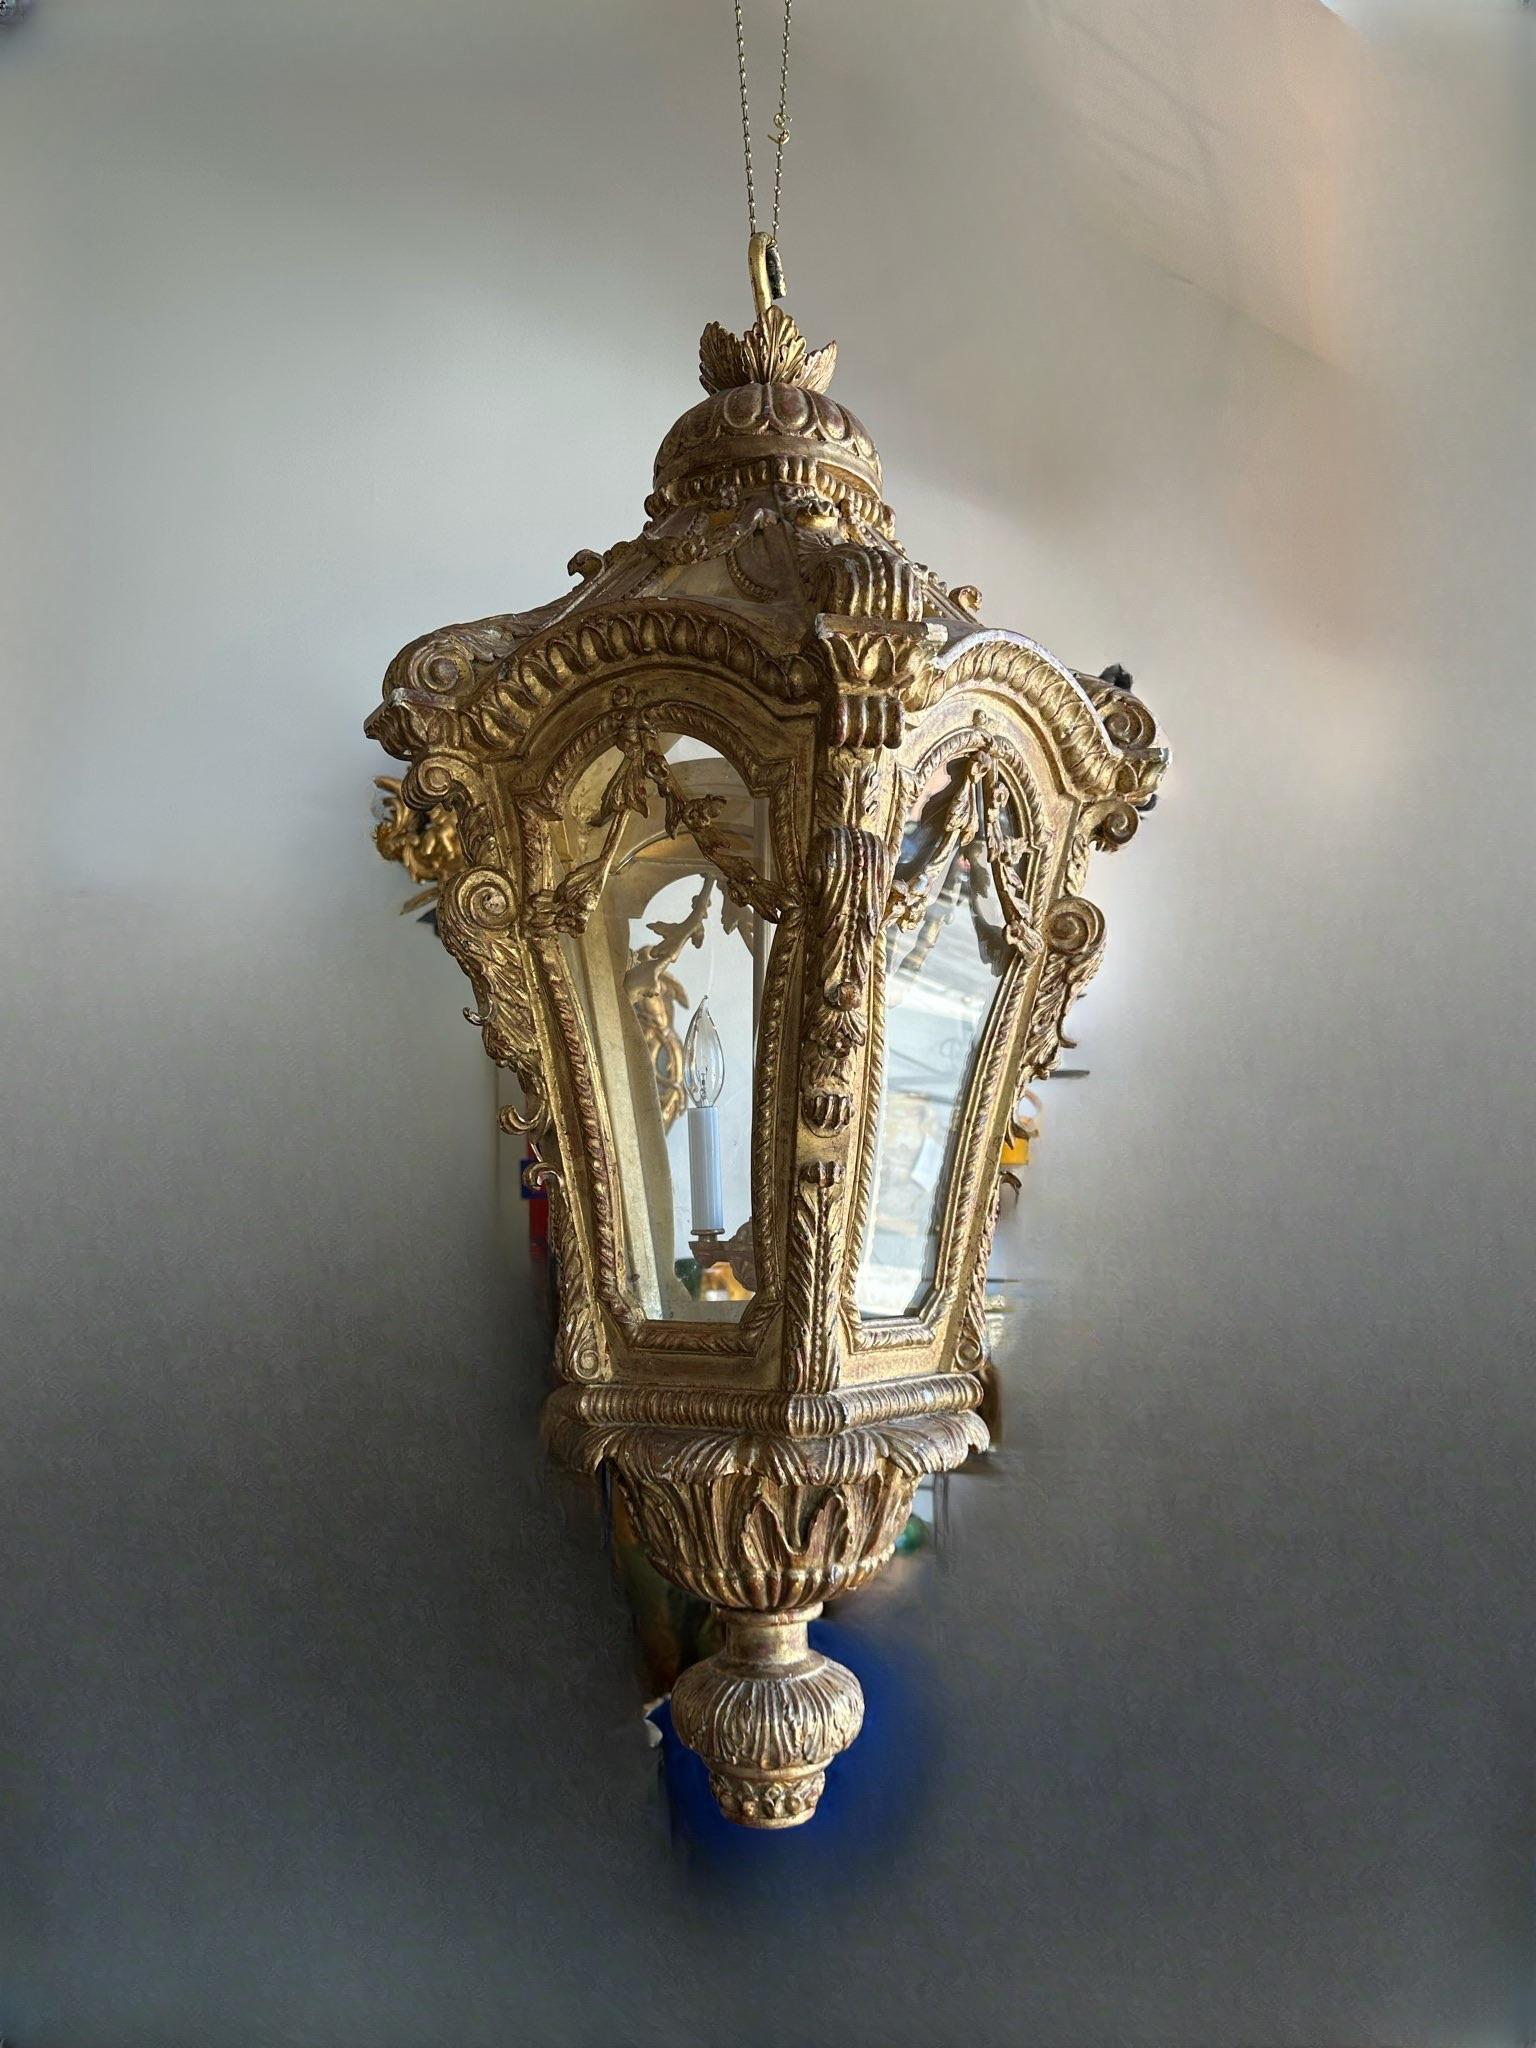 Baroque Style Carved and Gilt Wood Venetian Lantern.  Wonderful delicate carved decoration with original gilded finish and dramatic proportions. Recently rewired. Made in Venice  circa 1860